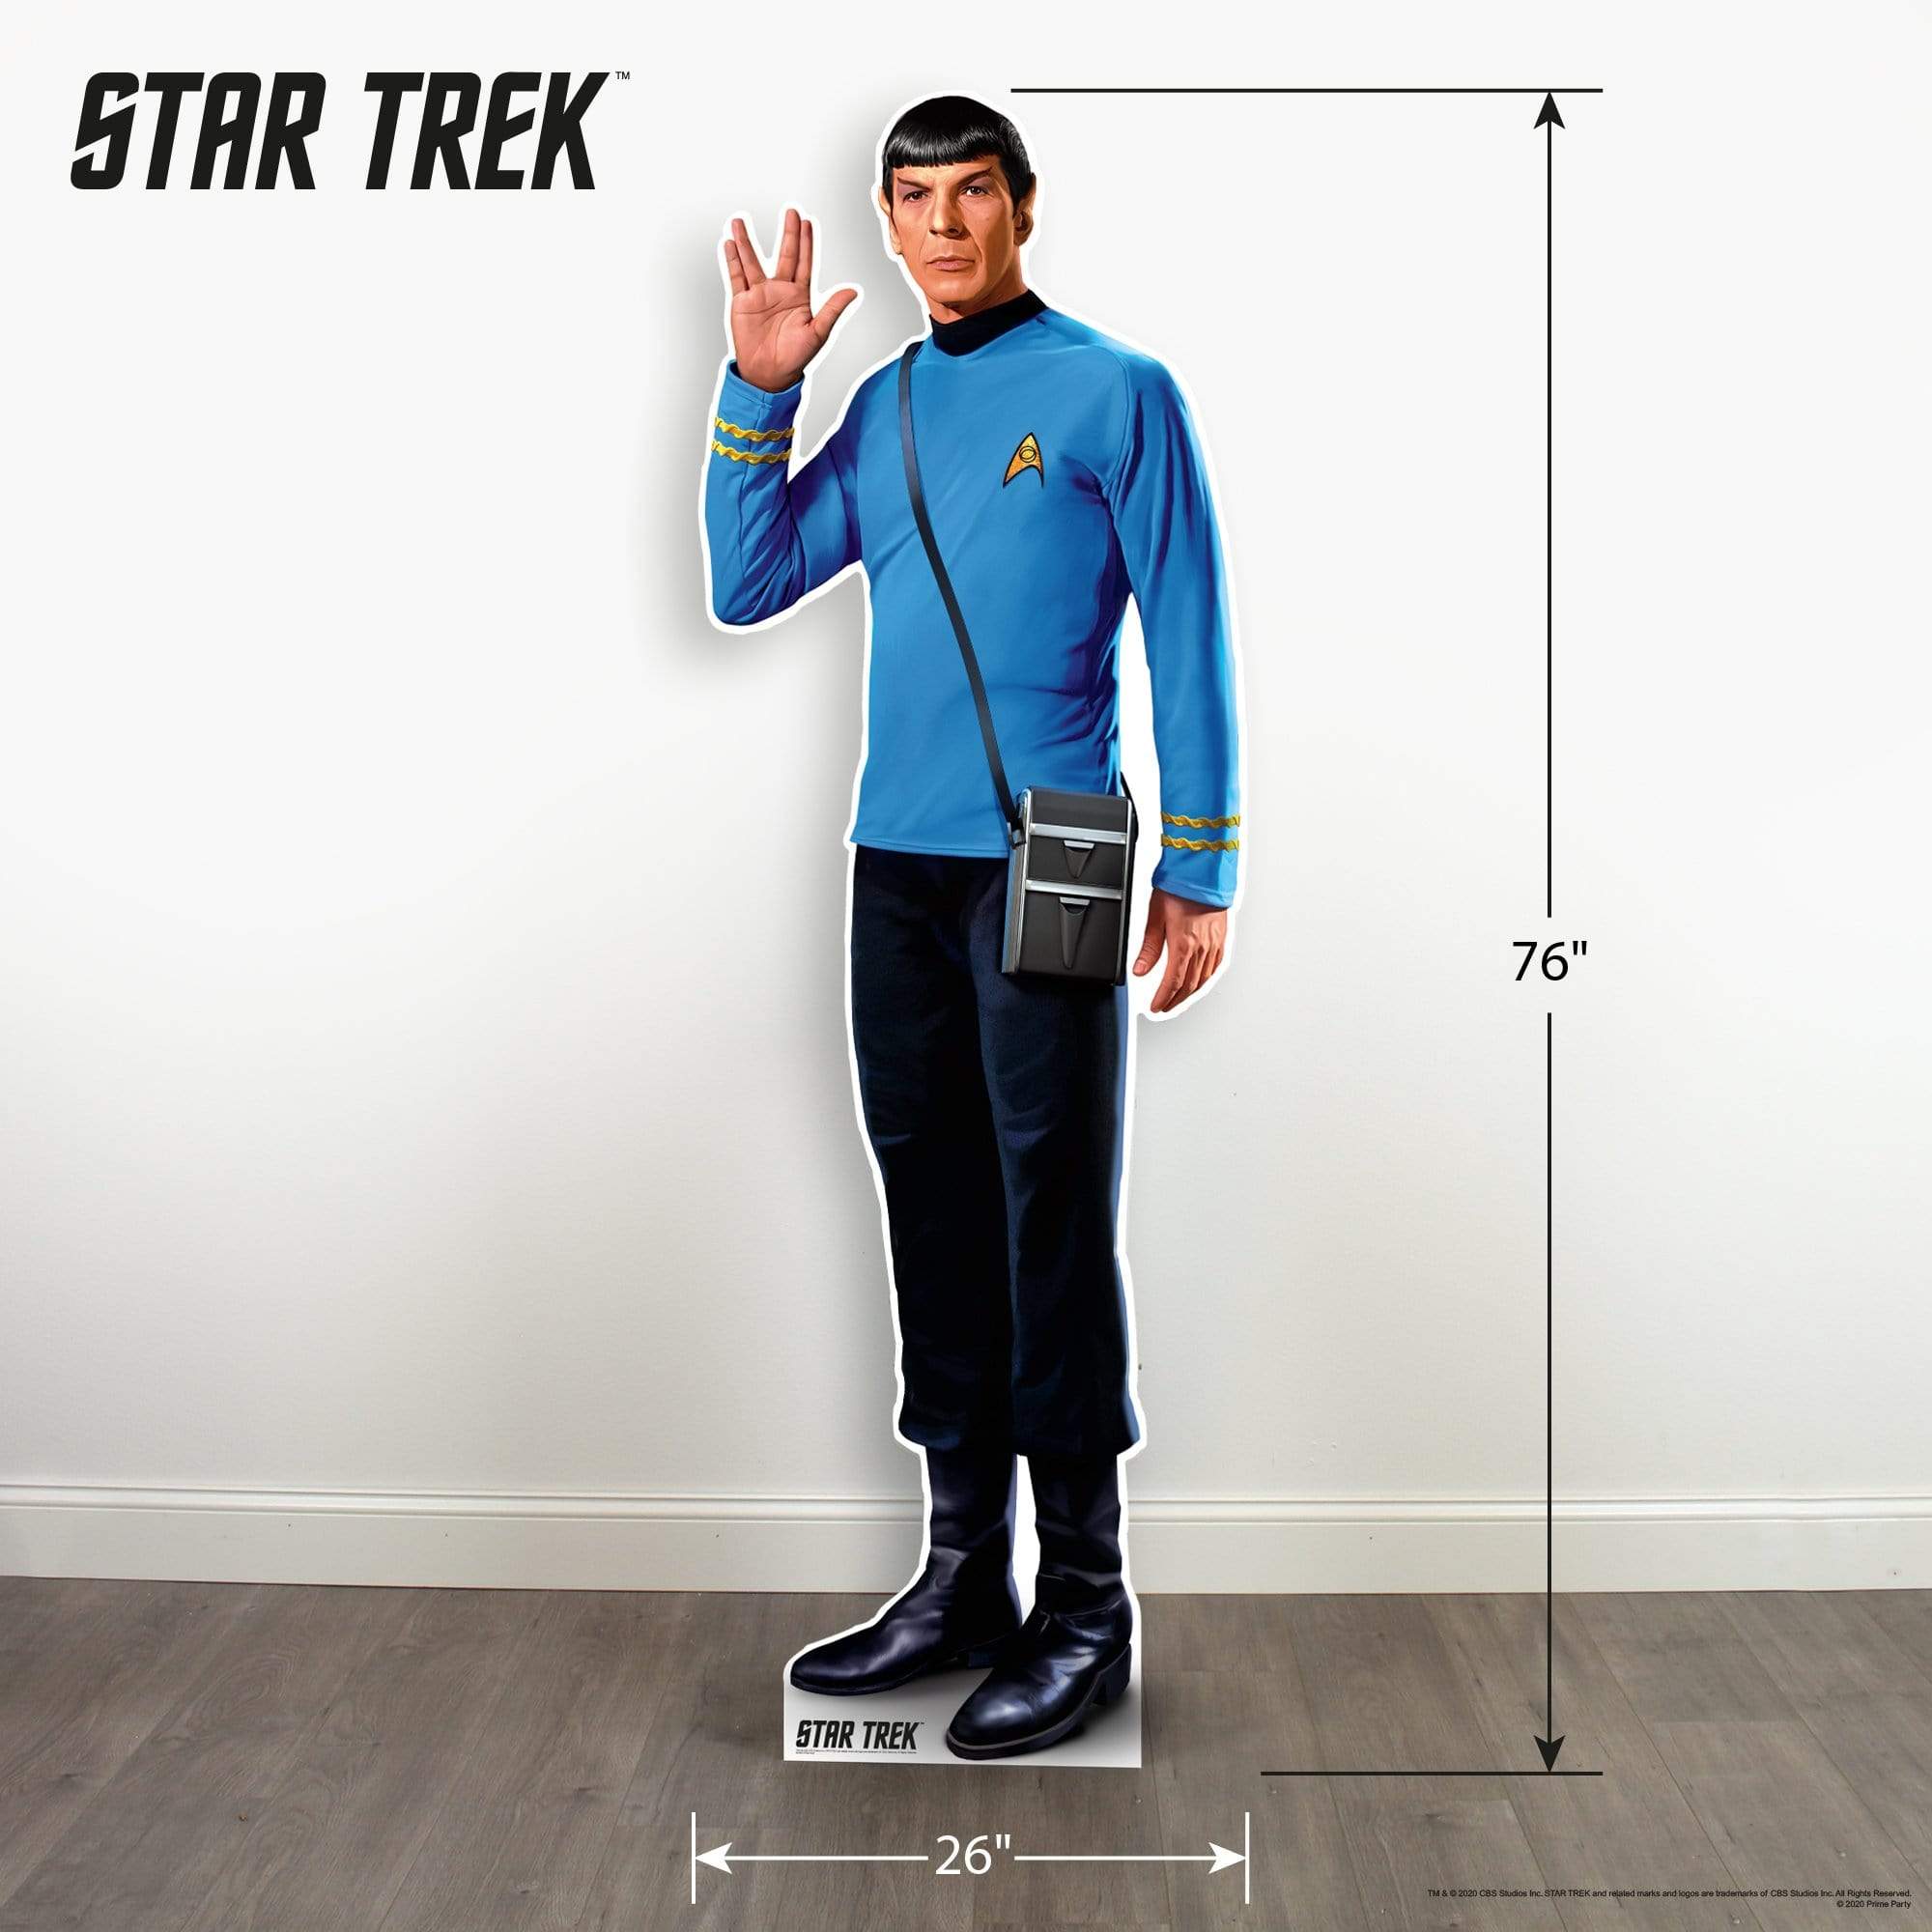 10 Perfect Star Trek Gifts For The Trekkie In Your Life